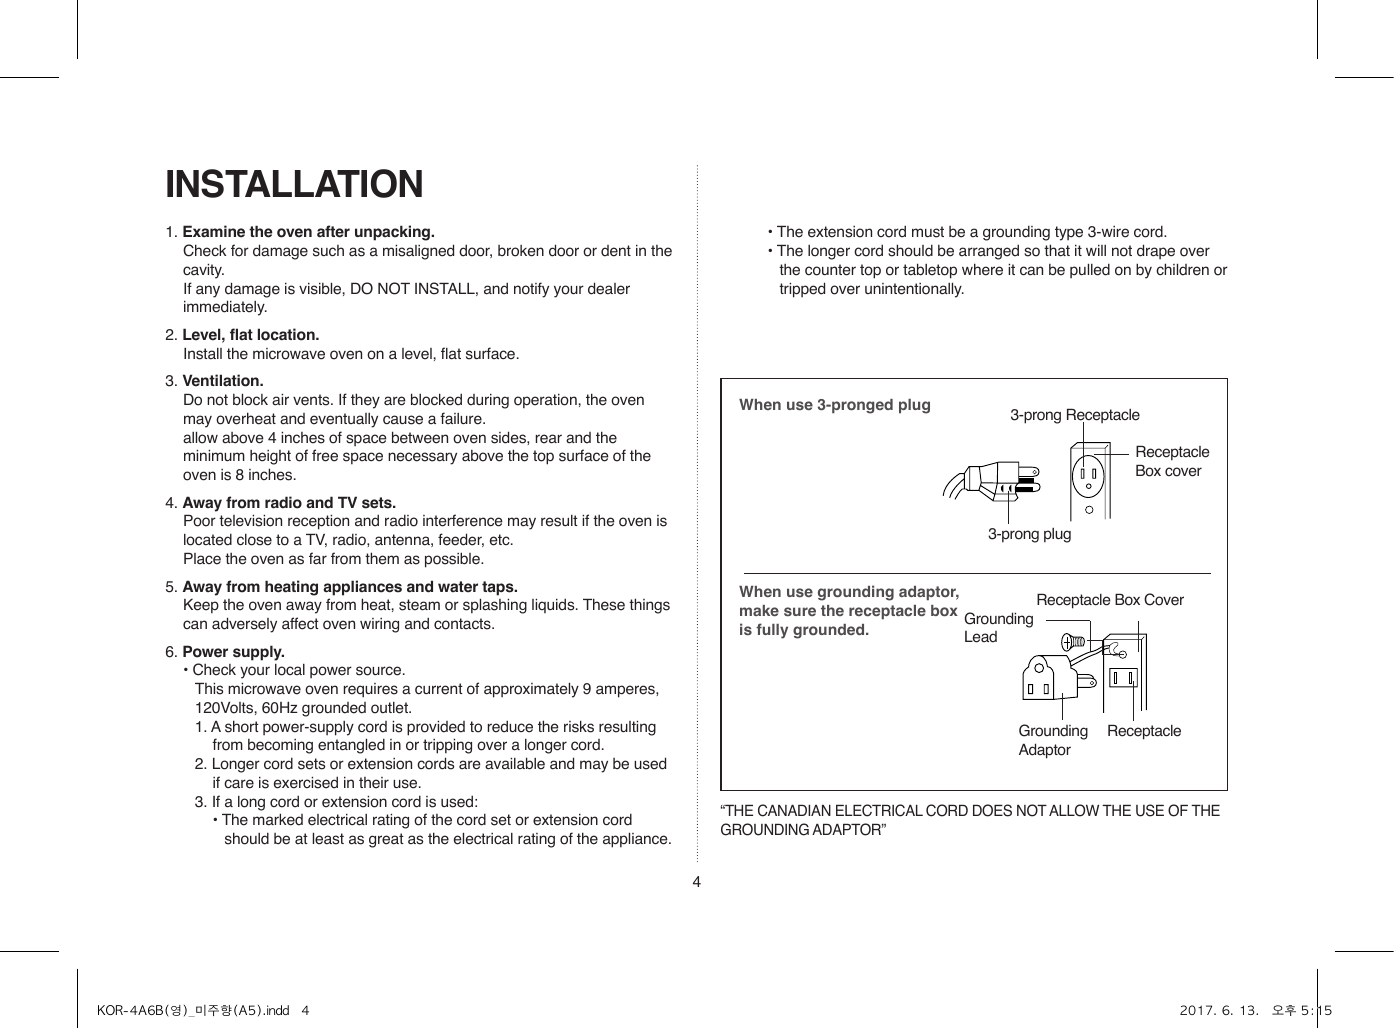 4INSTALLATION1. Examine the oven after unpacking.  Check for damage such as a misaligned door, broken door or dent in the cavity.   If any damage is visible, DO NOT INSTALL, and notify your dealer immediately.2. Level, flat location.  Install the microwave oven on a level, flat surface.3. Ventilation.  Do not block air vents. If they are blocked during operation, the oven may overheat and eventually cause a failure.   allow above 4 inches of space between oven sides, rear and the minimum height of free space necessary above the top surface of the oven is 8 inches.4. Away from radio and TV sets.  Poor television reception and radio interference may result if the oven is located close to a TV, radio, antenna, feeder, etc.    Place the oven as far from them as possible.5. Away from heating appliances and water taps.  Keep the oven away from heat, steam or splashing liquids. These things can adversely affect oven wiring and contacts.6. Power supply.  • Check your local power source.This microwave oven requires a current of approximately 9 amperes, 120Volts, 60Hz grounded outlet.1. A short power-supply cord is provided to reduce the risks resulting from becoming entangled in or tripping over a longer cord.2. Longer cord sets or extension cords are available and may be used if care is exercised in their use.3. If a long cord or extension cord is used:• The marked electrical rating of the cord set or extension cord should be at least as great as the electrical rating of the appliance.When use 3-pronged plugWhen use grounding adaptor, make sure the receptacle box is fully grounded.Receptacle Box CoverReceptacle GroundingAdaptor3-prong ReceptacleReceptacle Box cover3-prong plugGroundingLead“THE CANADIAN ELECTRICAL CORD DOES NOT ALLOW THE USE OF THE GROUNDING ADAPTOR”• The extension cord must be a grounding type 3-wire cord.• The longer cord should be arranged so that it will not drape over the counter top or tabletop where it can be pulled on by children or tripped over unintentionally.KOR-4A6B(영)_미주향(A5).indd   4 2017. 6. 13.   오후 5:15